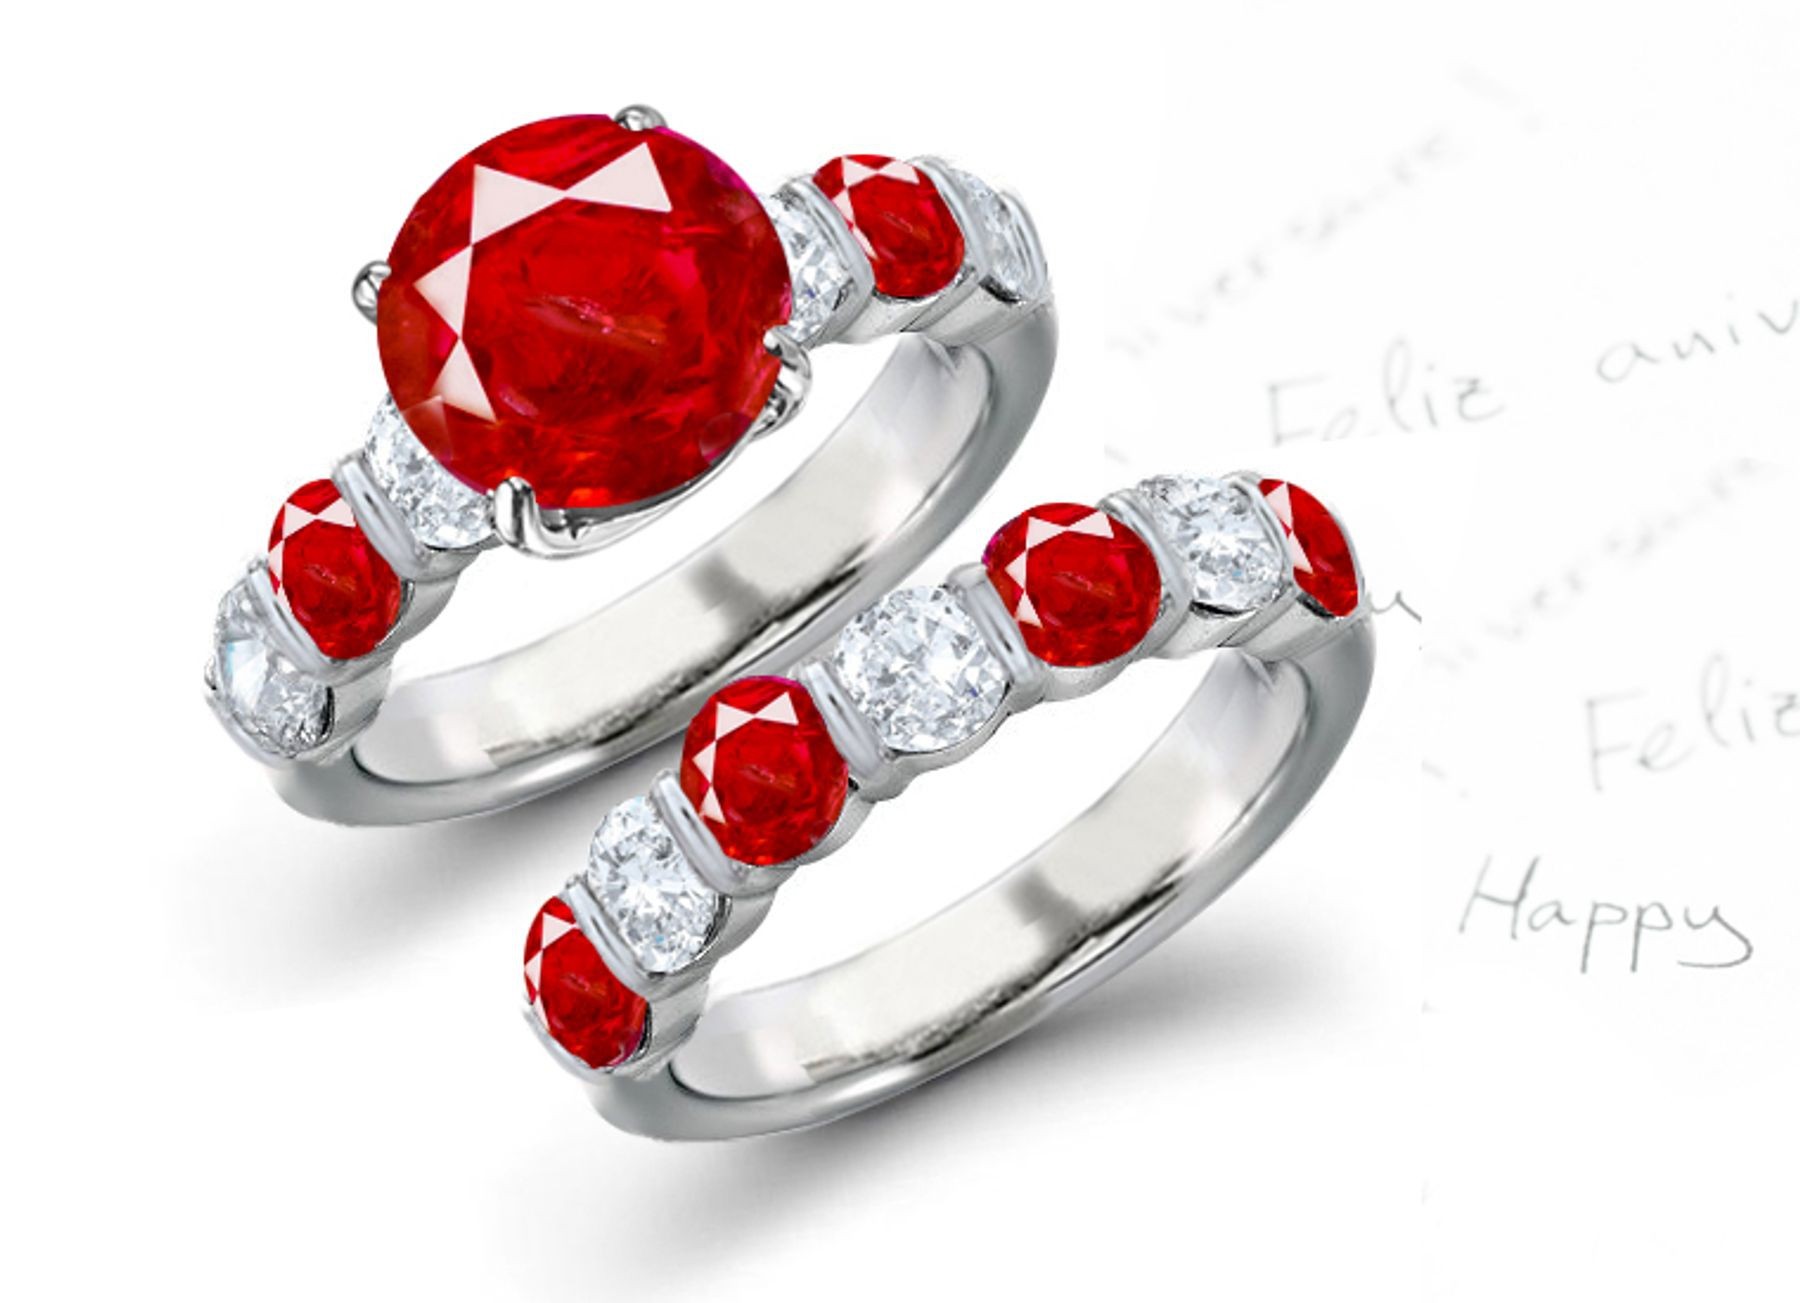 Entirely Different: Blood Red Large Top Stone 5 Side Stone Ruby & Diamond Ring & 5 Side Stone Bar Set Gold Matching Stones Band